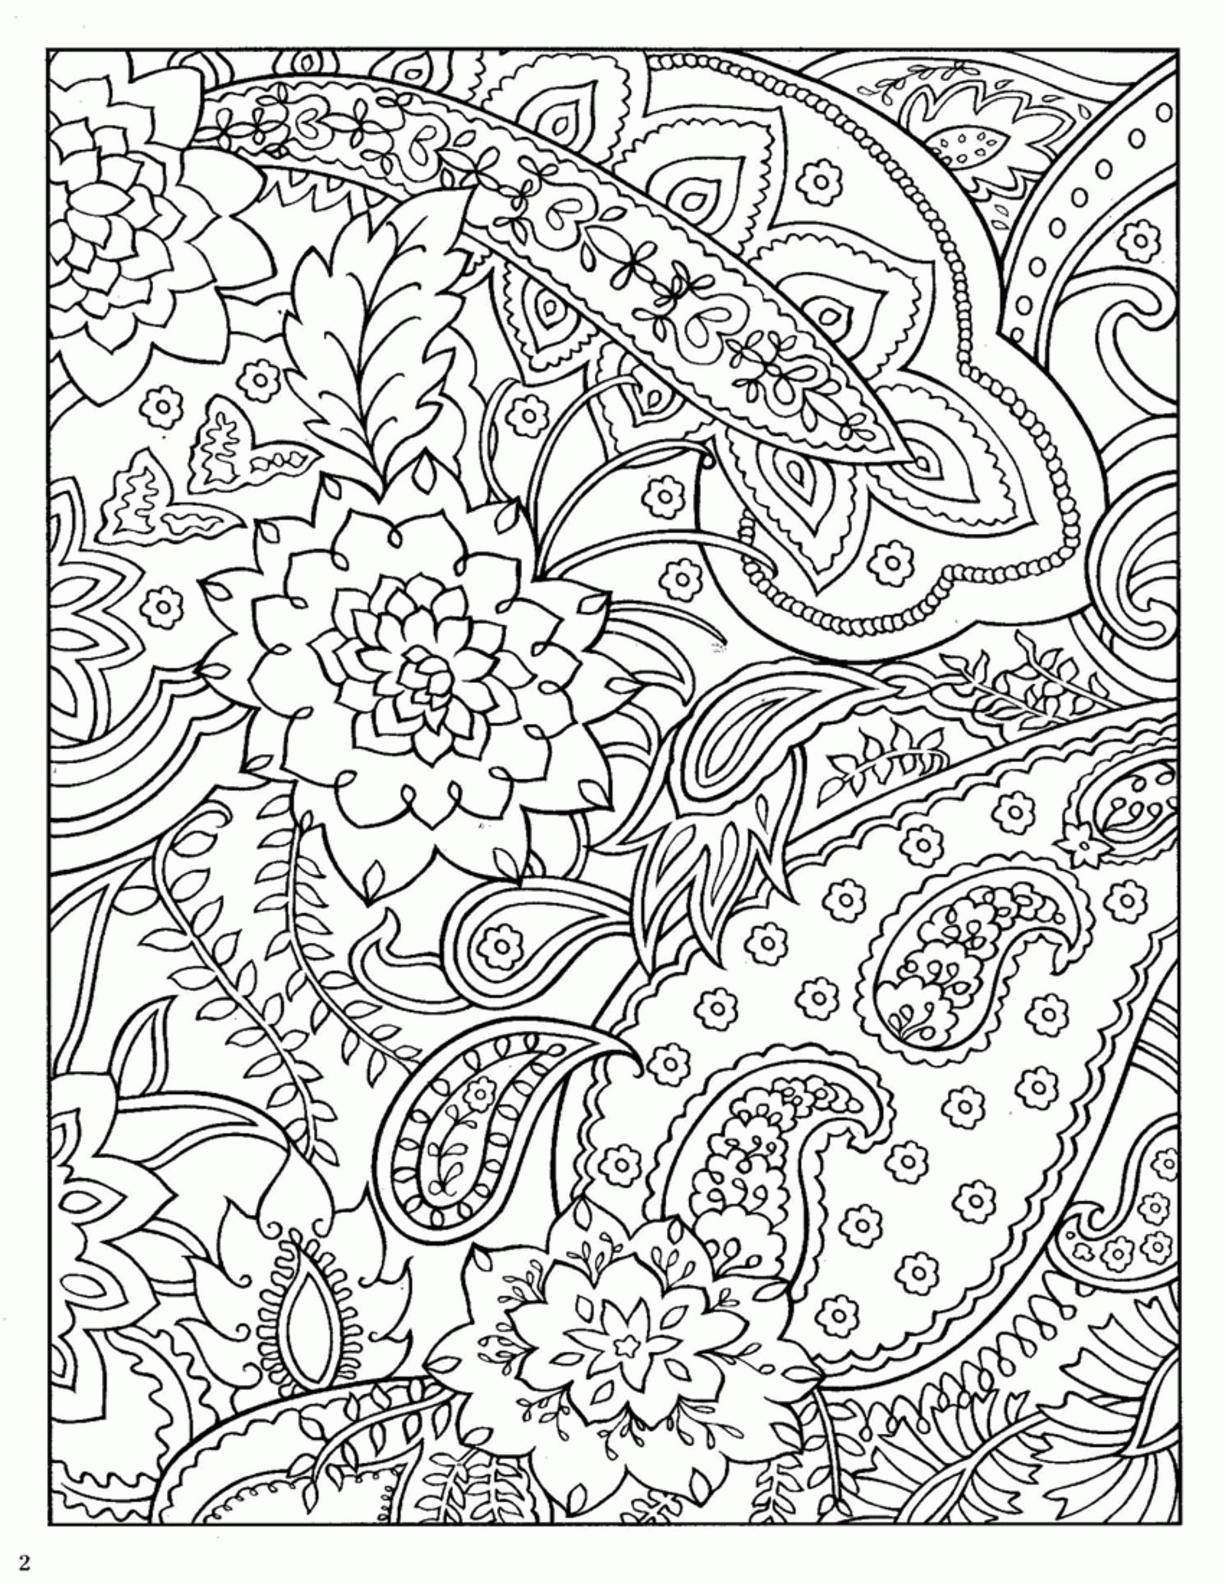 Free Paisley Coloring Pages Printable, Download Free Paisley Coloring ...